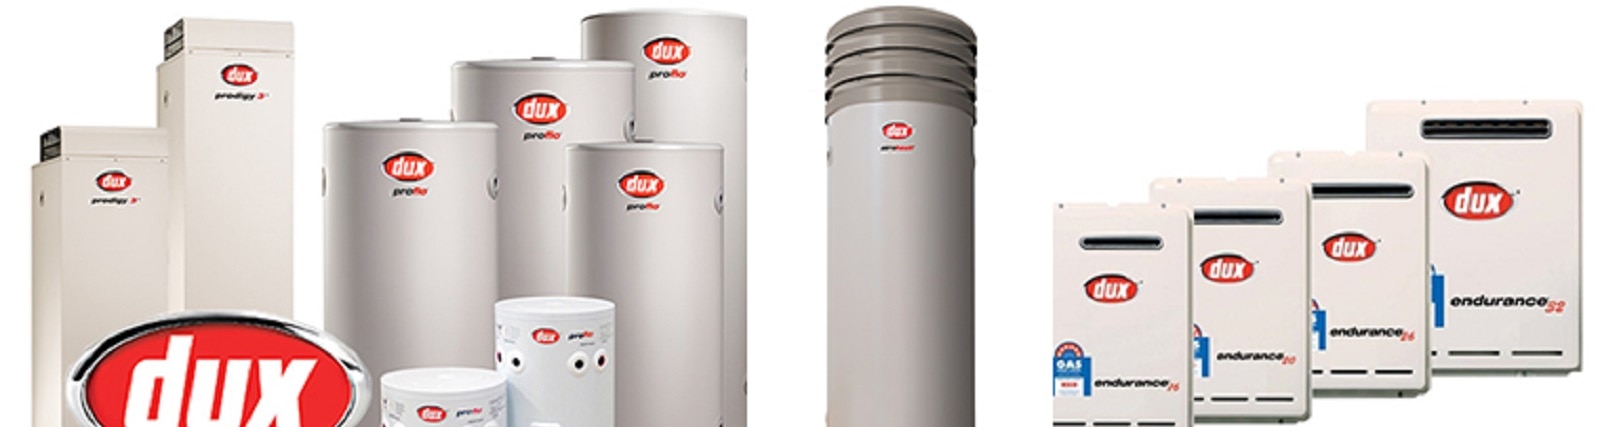 the range of dux hot water heaters